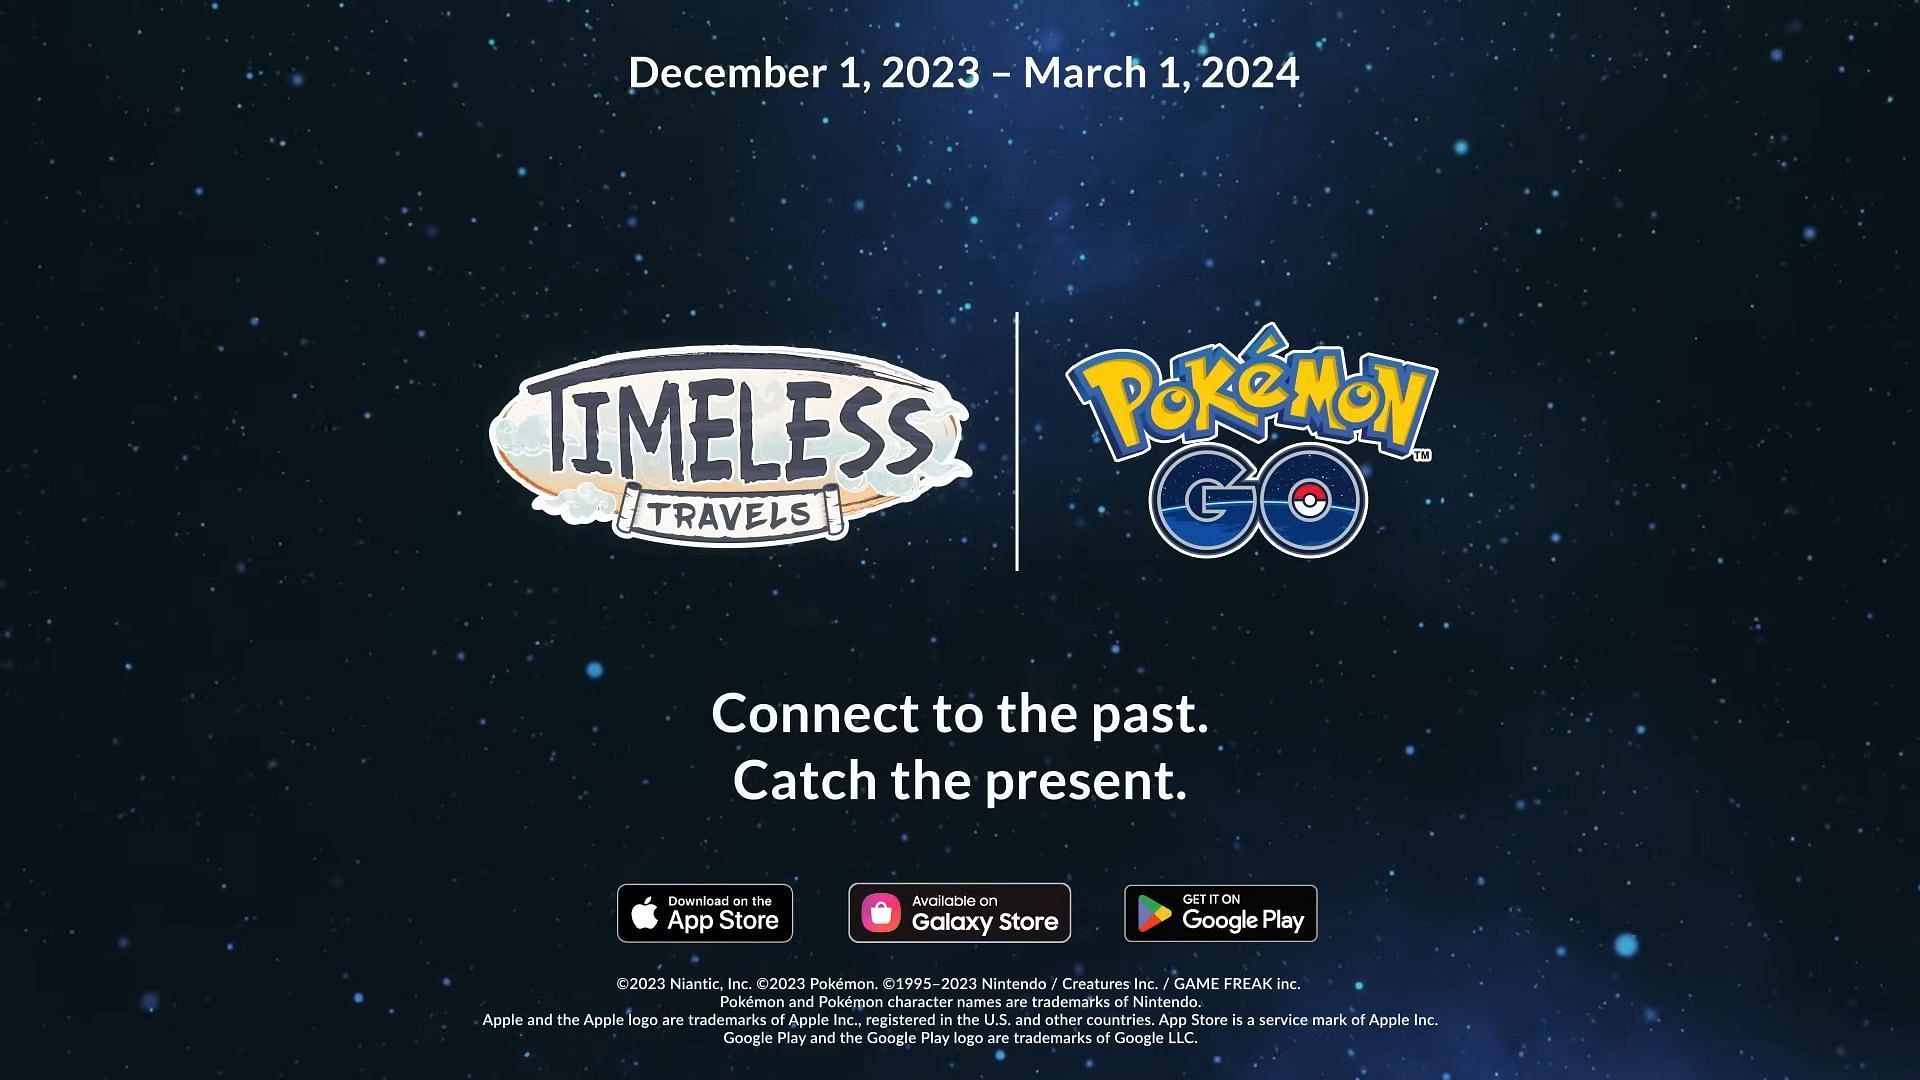 The Timeless Travels season coincidentally ends after the Lunar New Year (Image via Niantic)